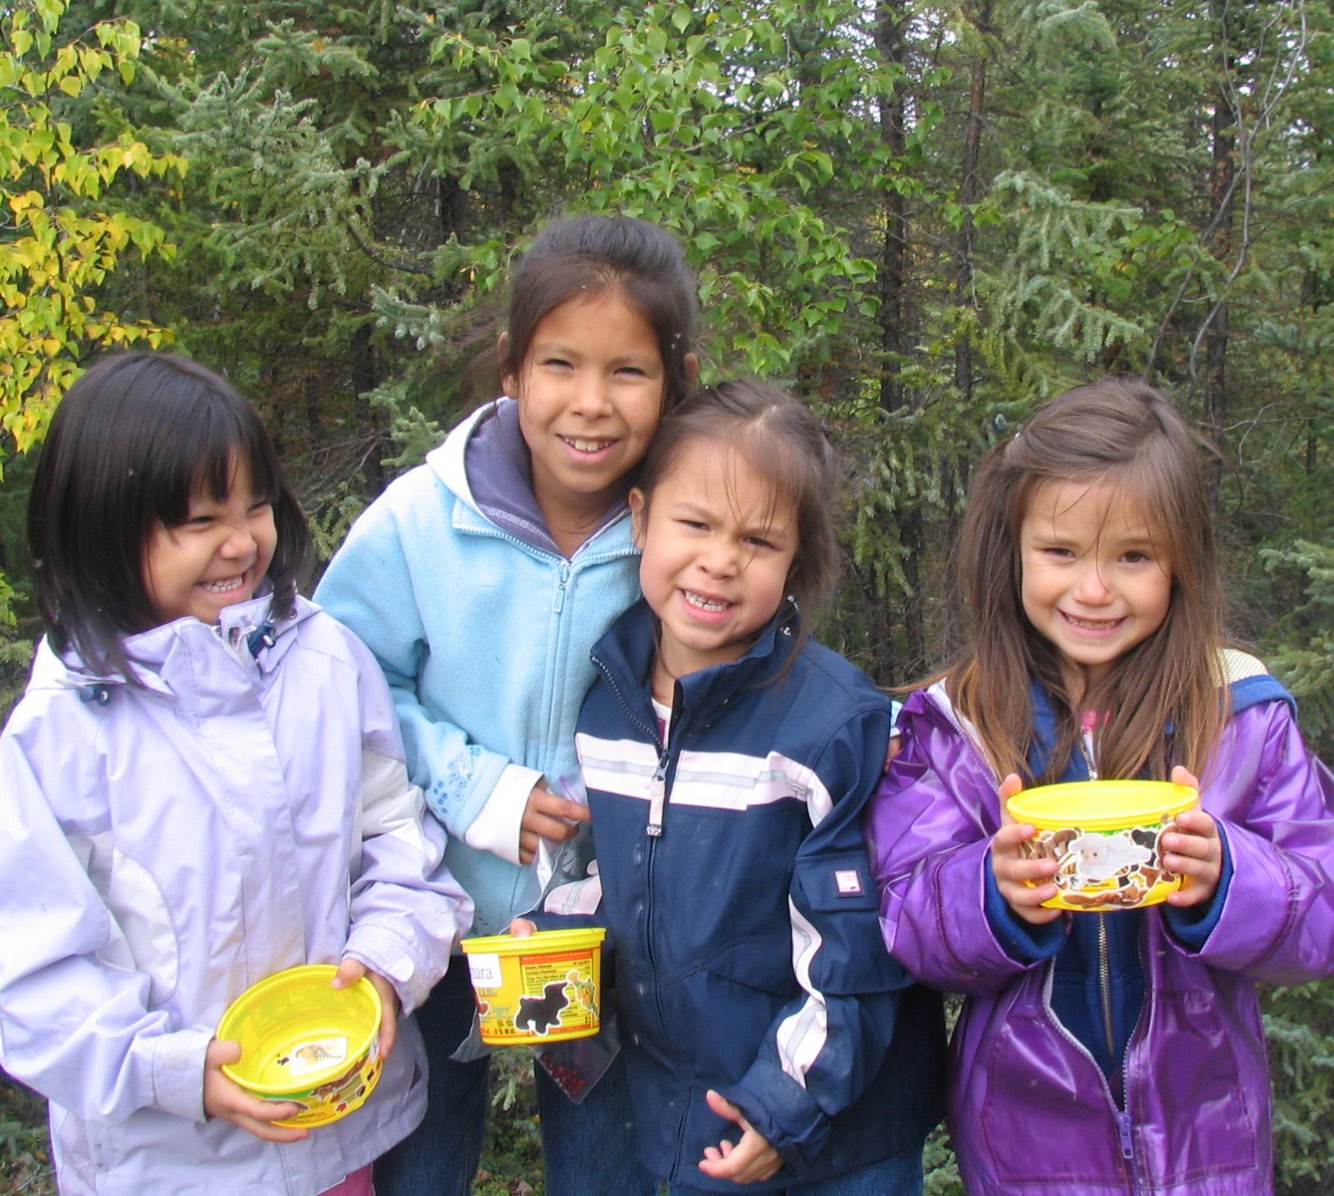 On the land learning provides First Nations children with opportunities to connect with their language and culture.